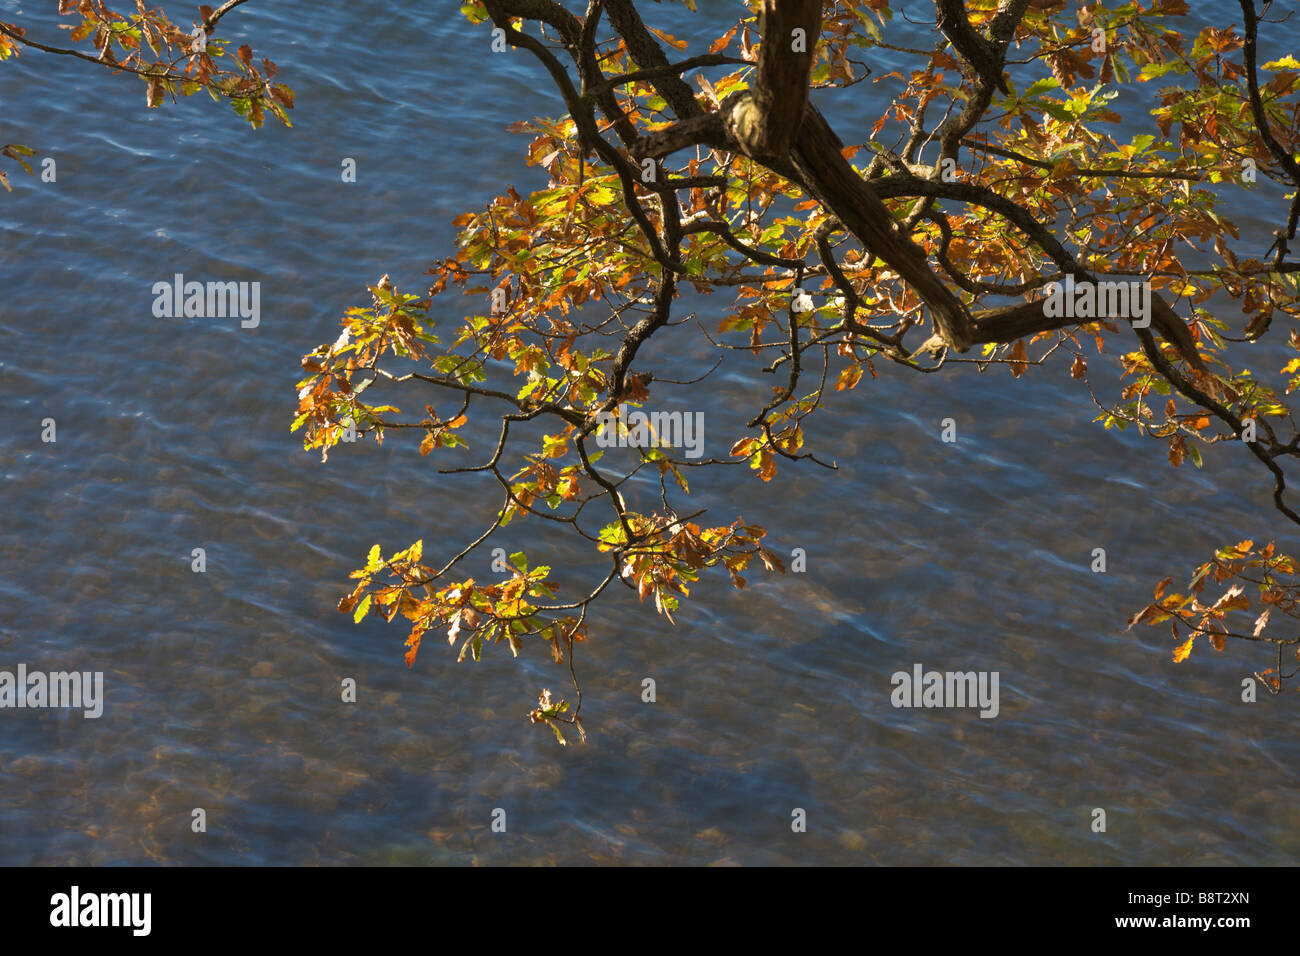 Oak tree branch with golden leaves in autumn hanging over water Stock Photo